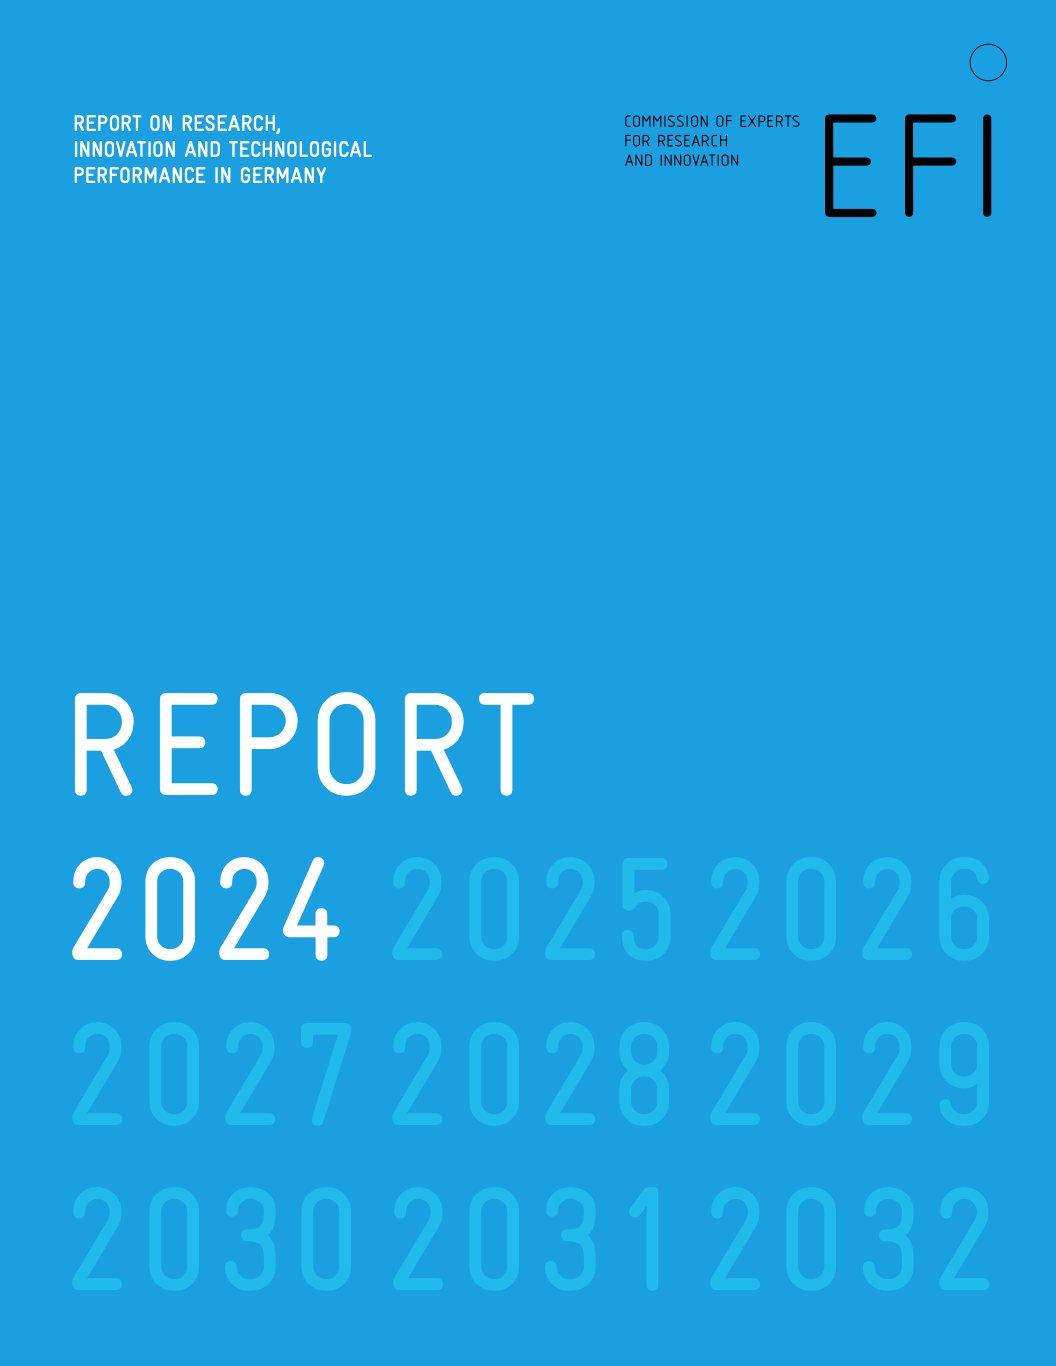 title page of the EFI report 2024